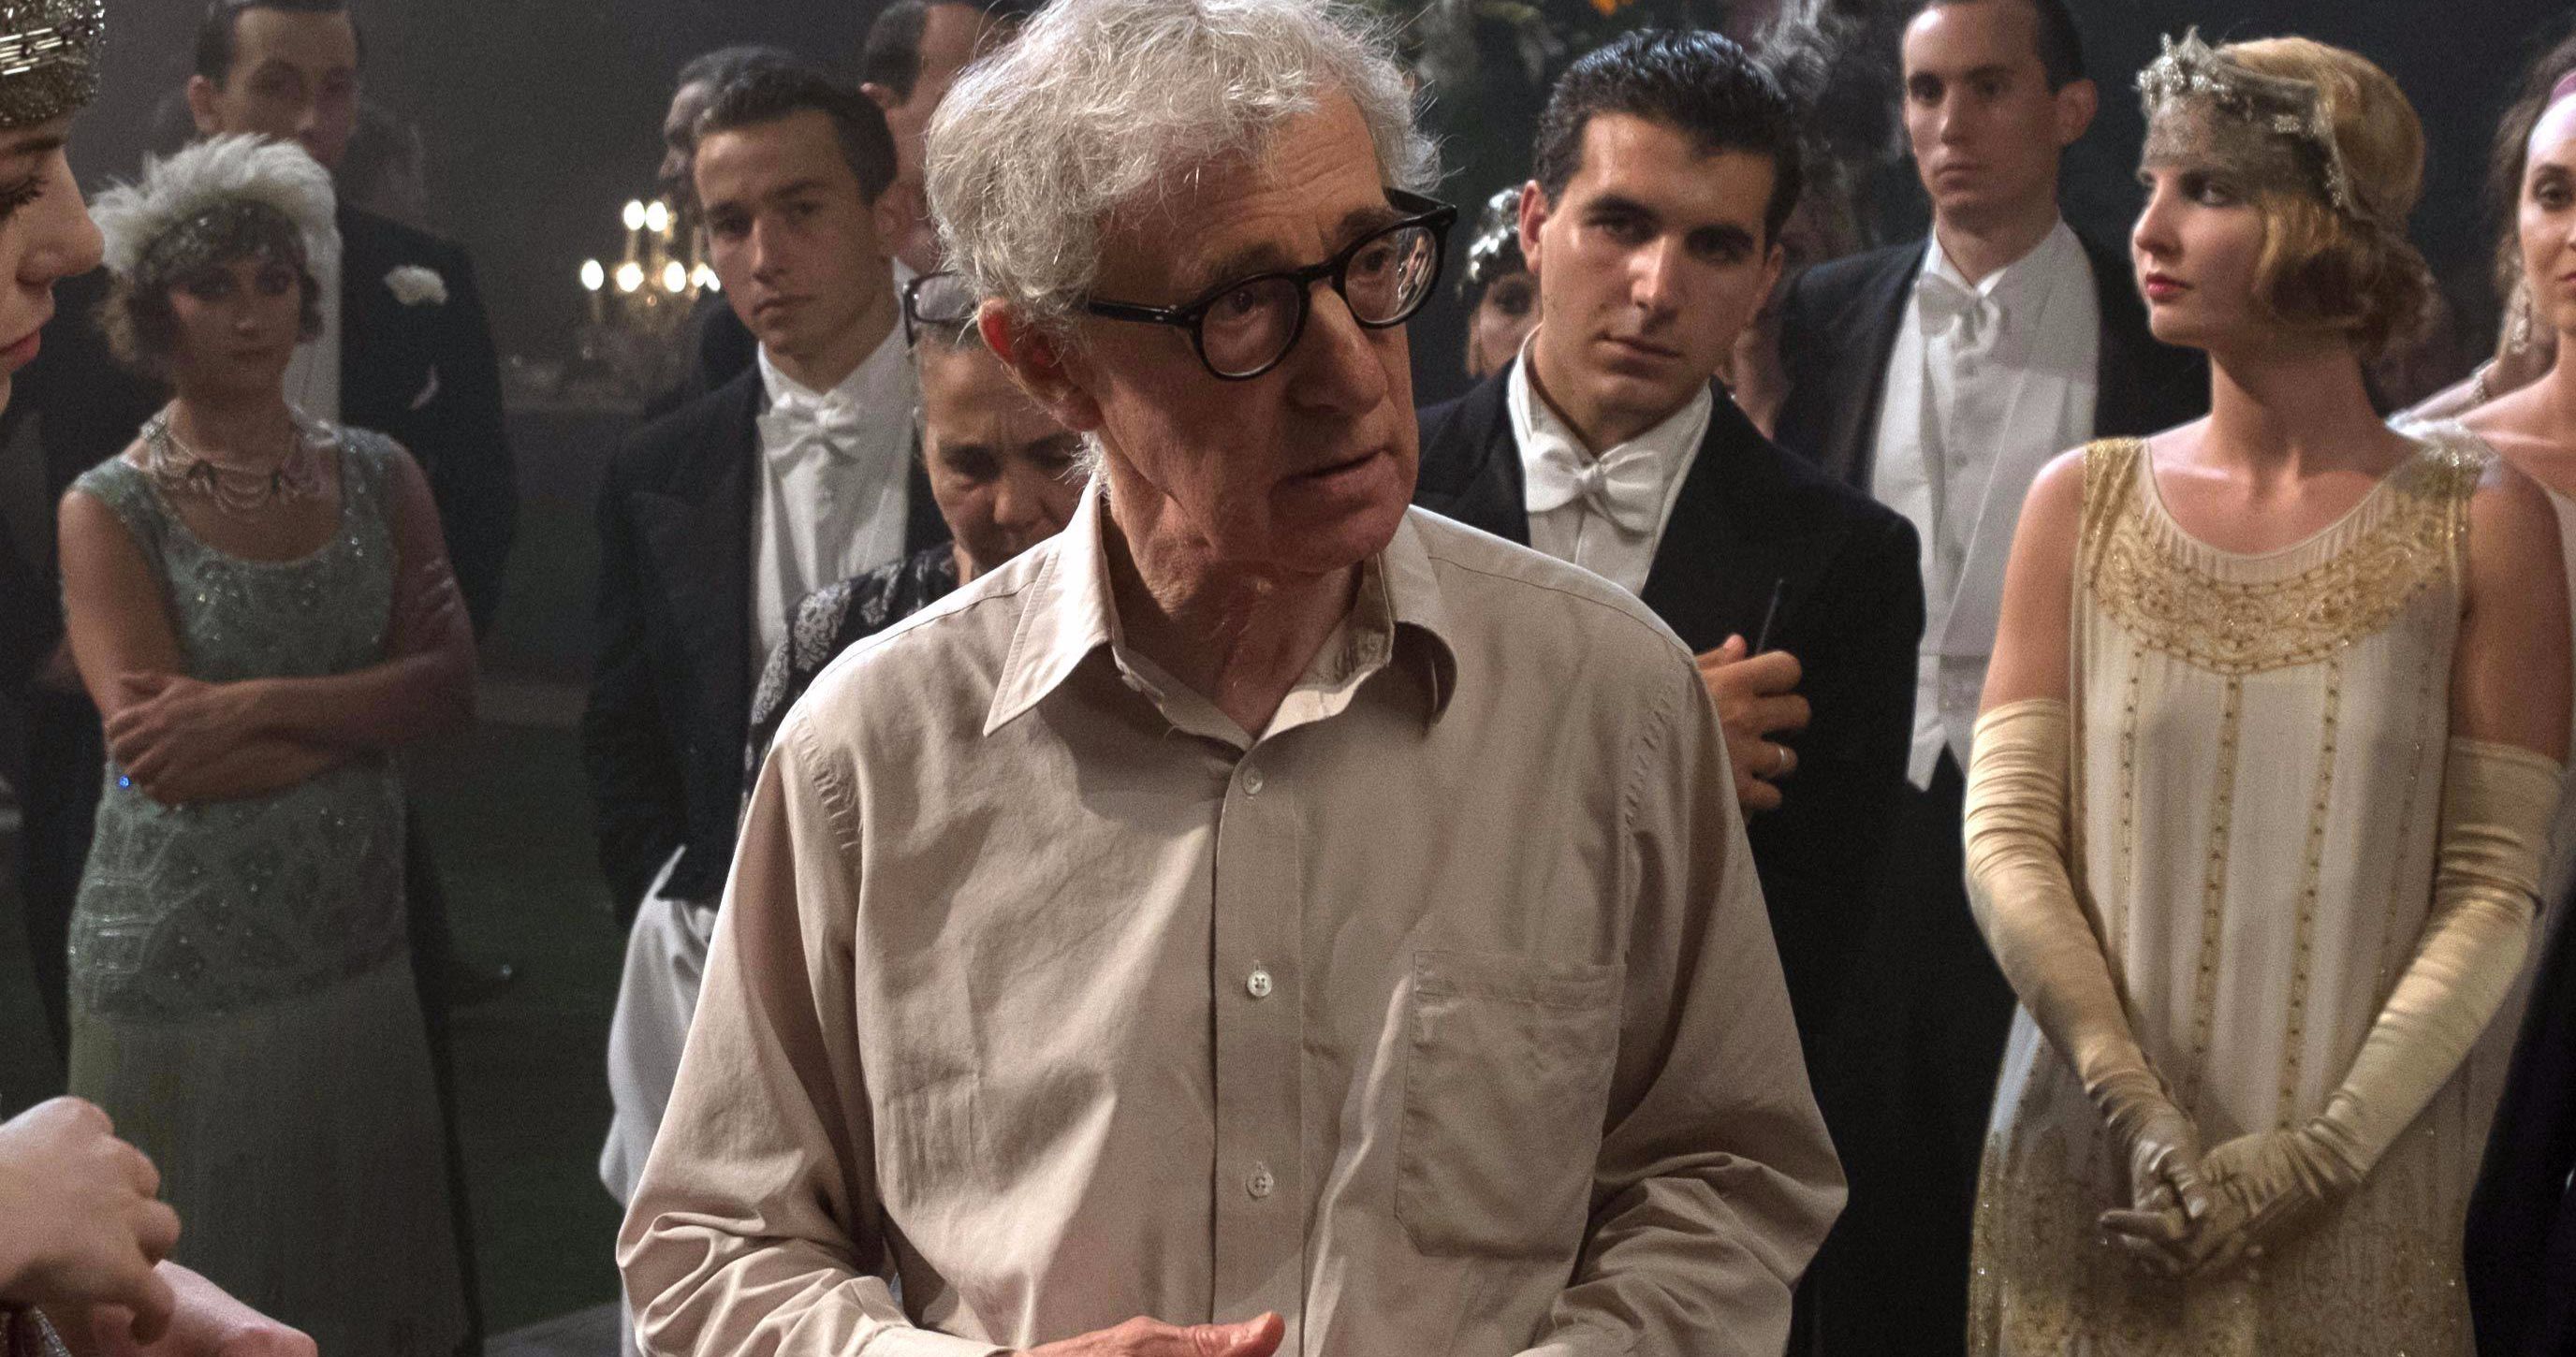 Woody Allen Slams Actors Who Denounce Him, Calls It 'The Fashionable Thing to Do'